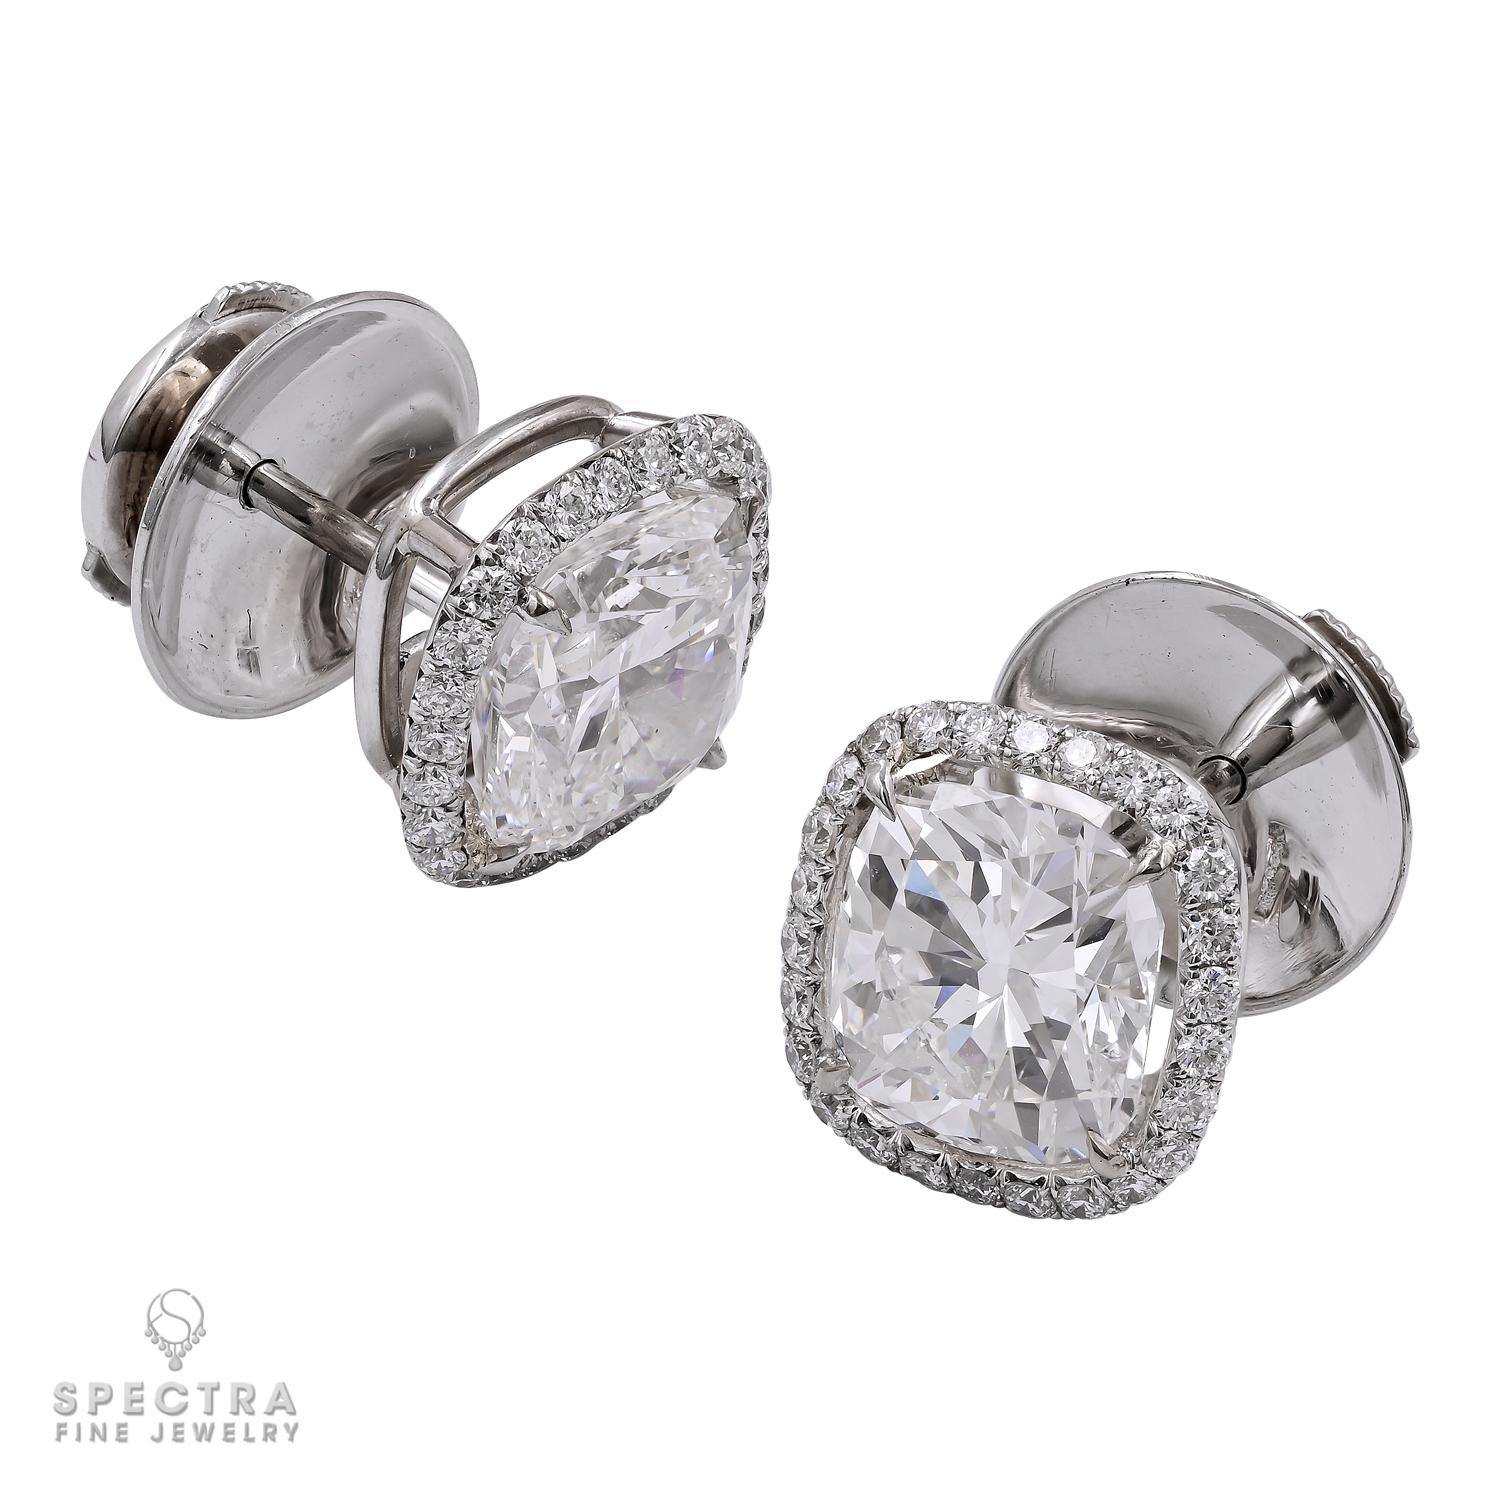 Introducing the epitome of timeless beauty - these exquisite diamond stud earrings!
A woman's jewelry collection is never complete without a pair of classic diamond studs, and these are truly exceptional. From casual chic to glamorous galas, they're